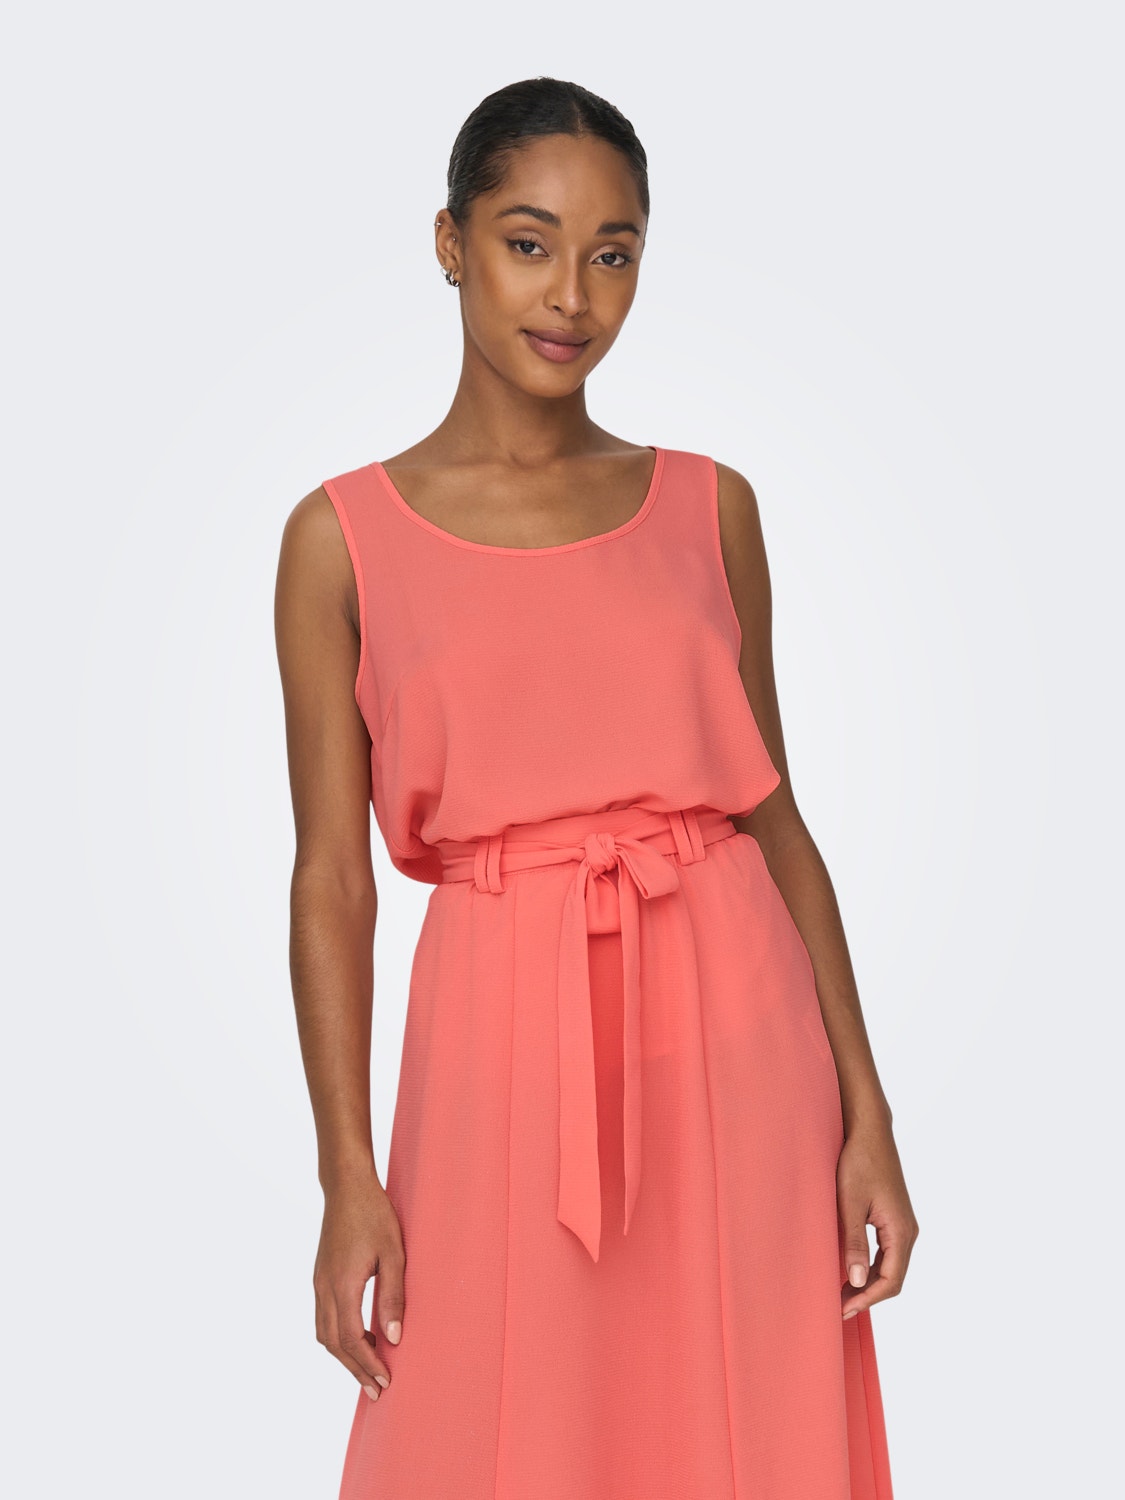 ONLY Solid colored Top -Georgia Peach - 15203227